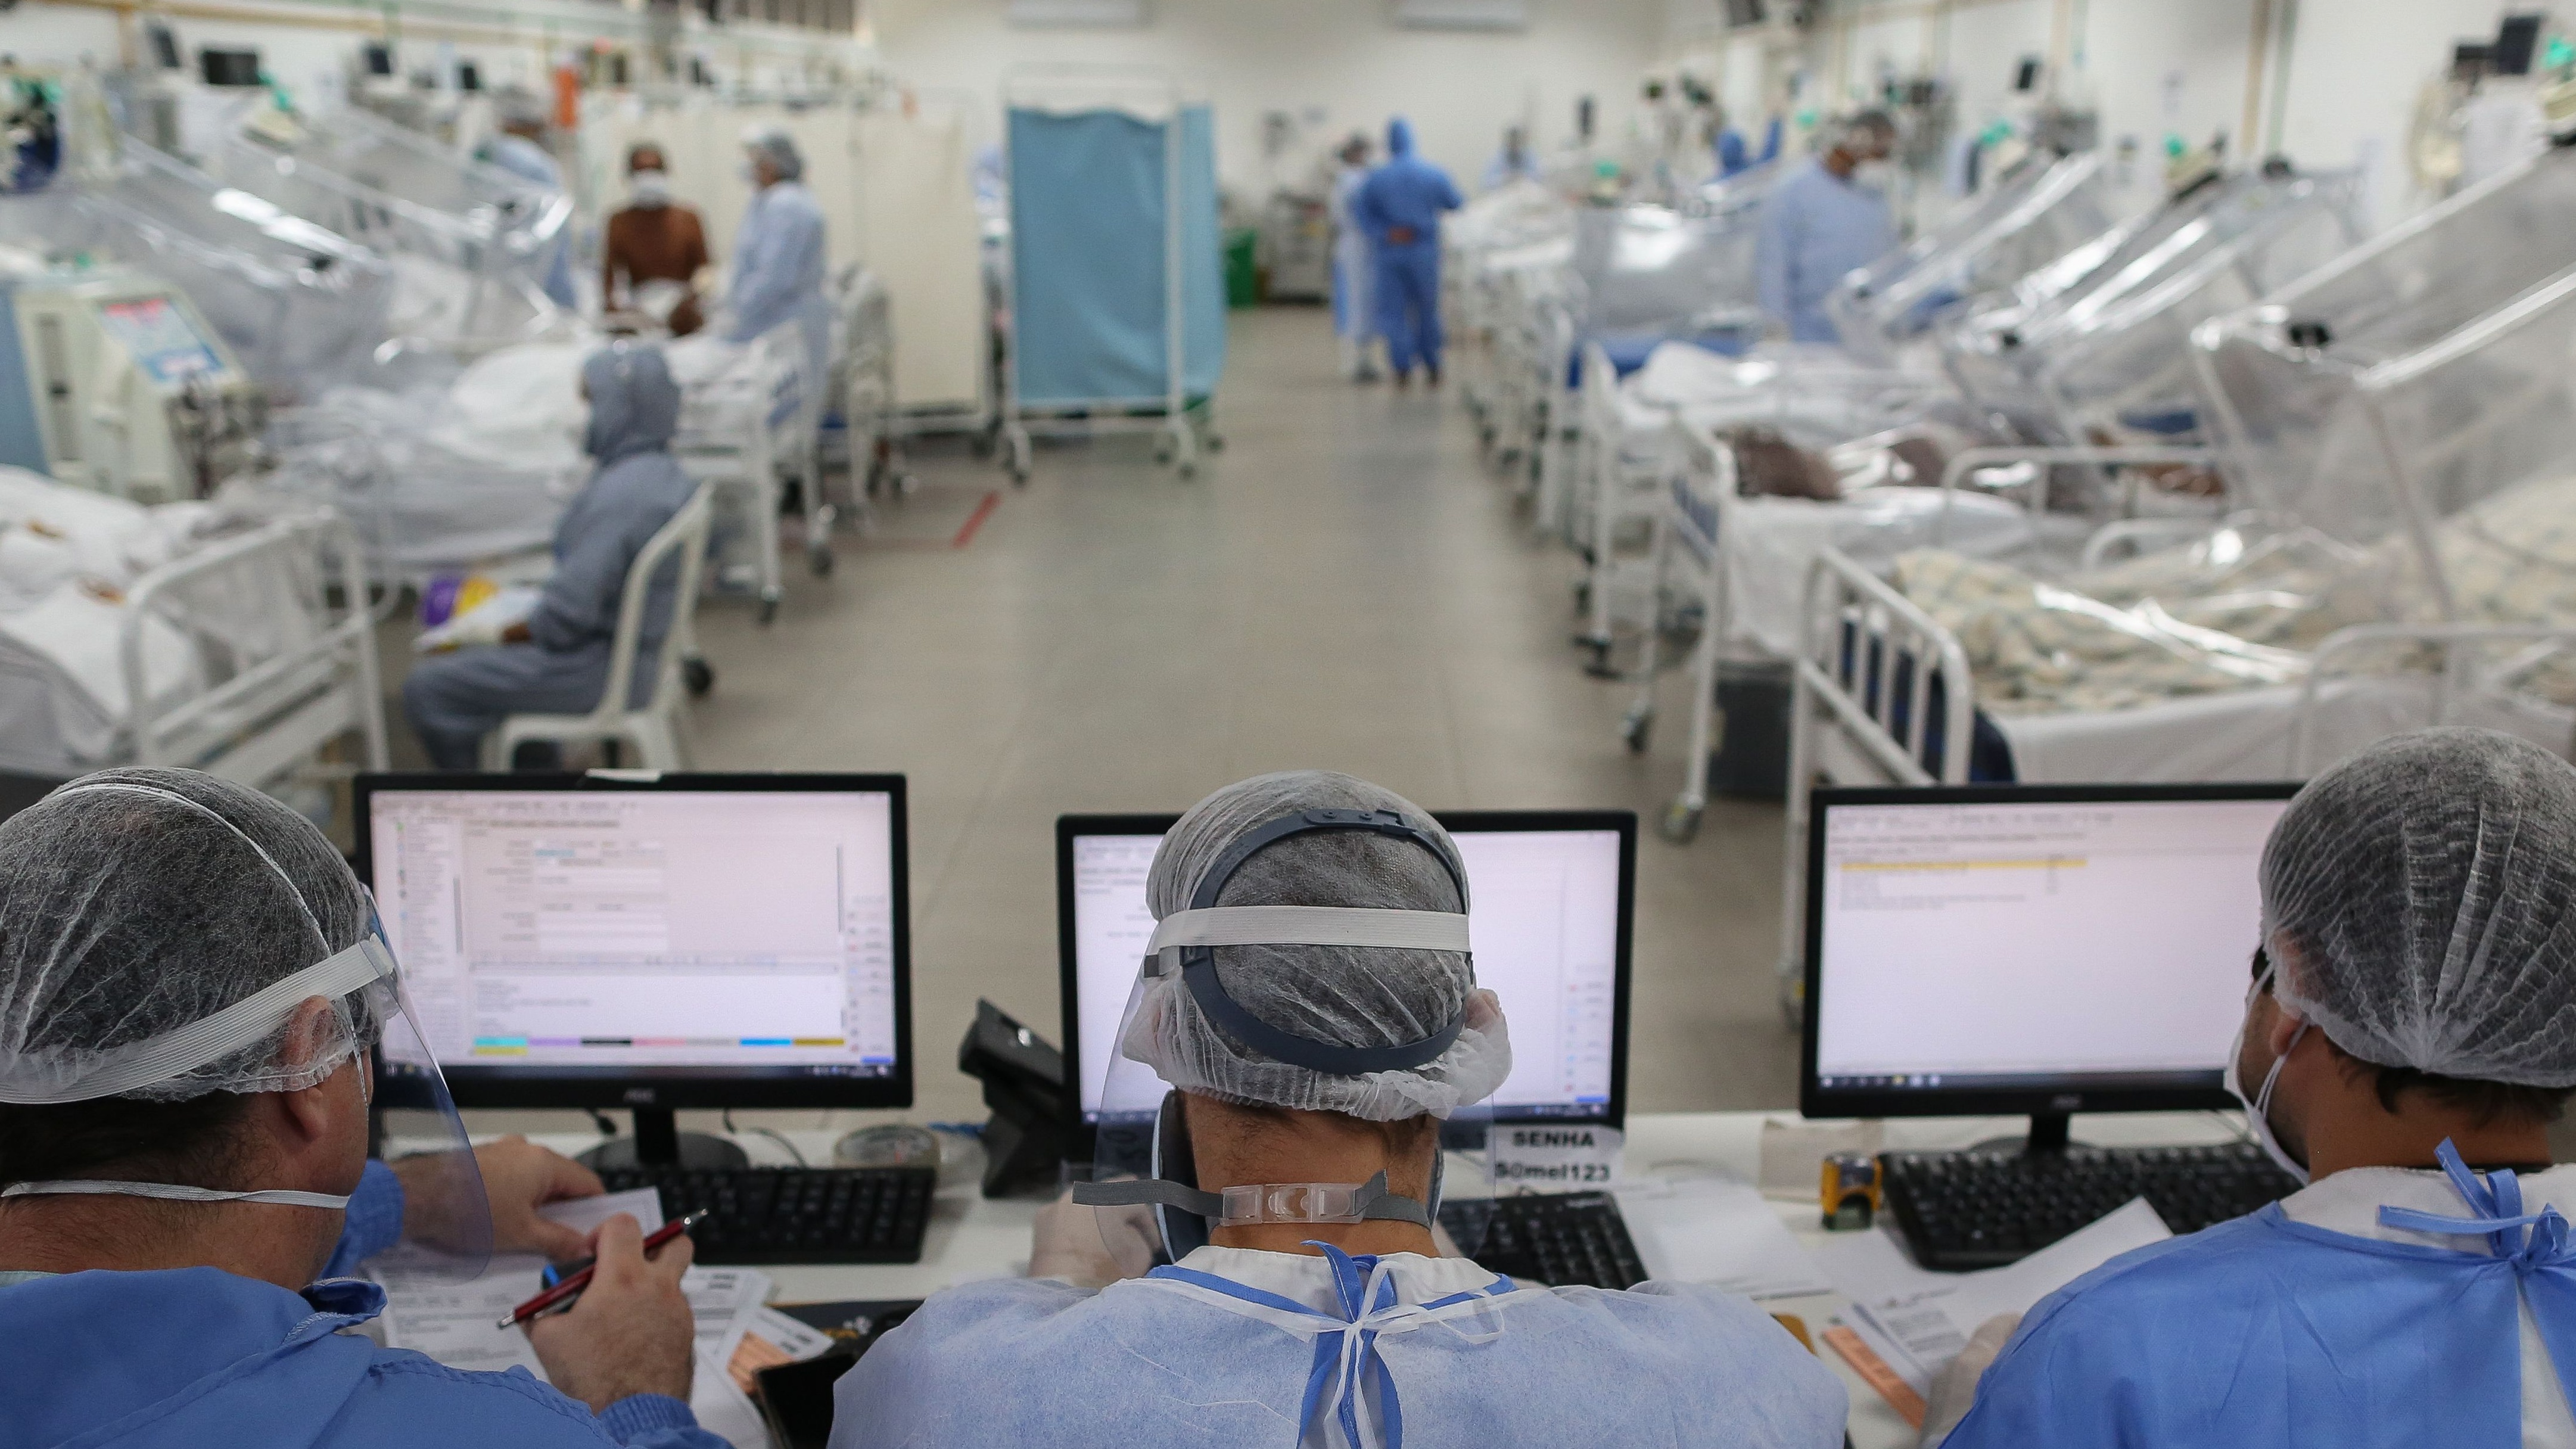 The intensive care unit at Gilberto Novaes Hospital in Manaus, Brazil